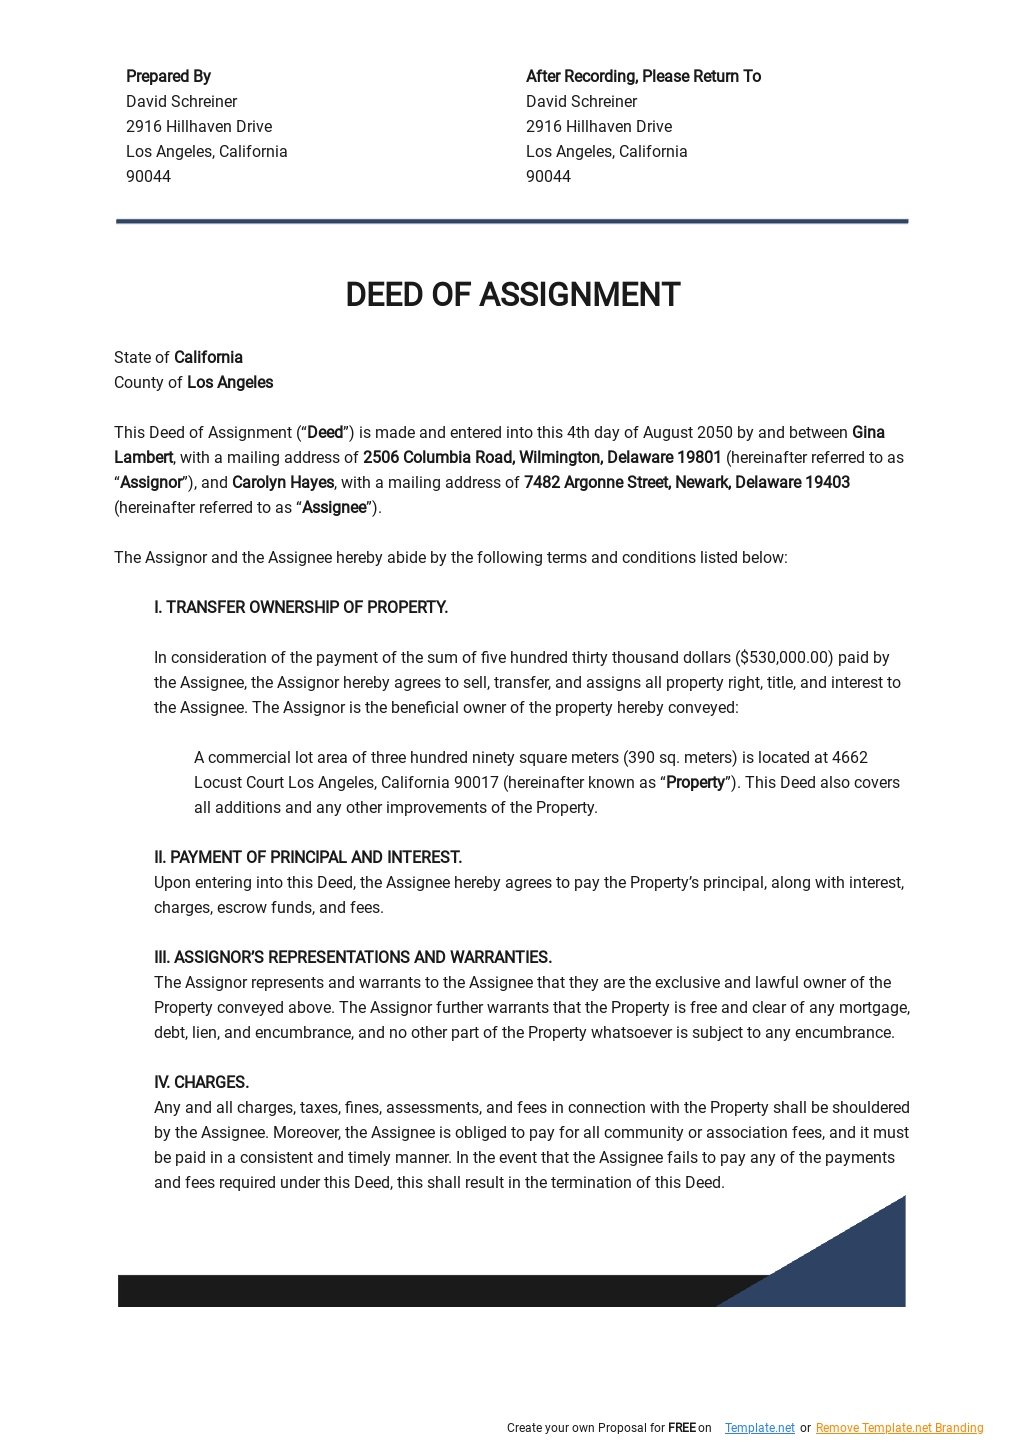 Deed of Assignment Template - Google Docs, Word, Apple Pages | Template.net